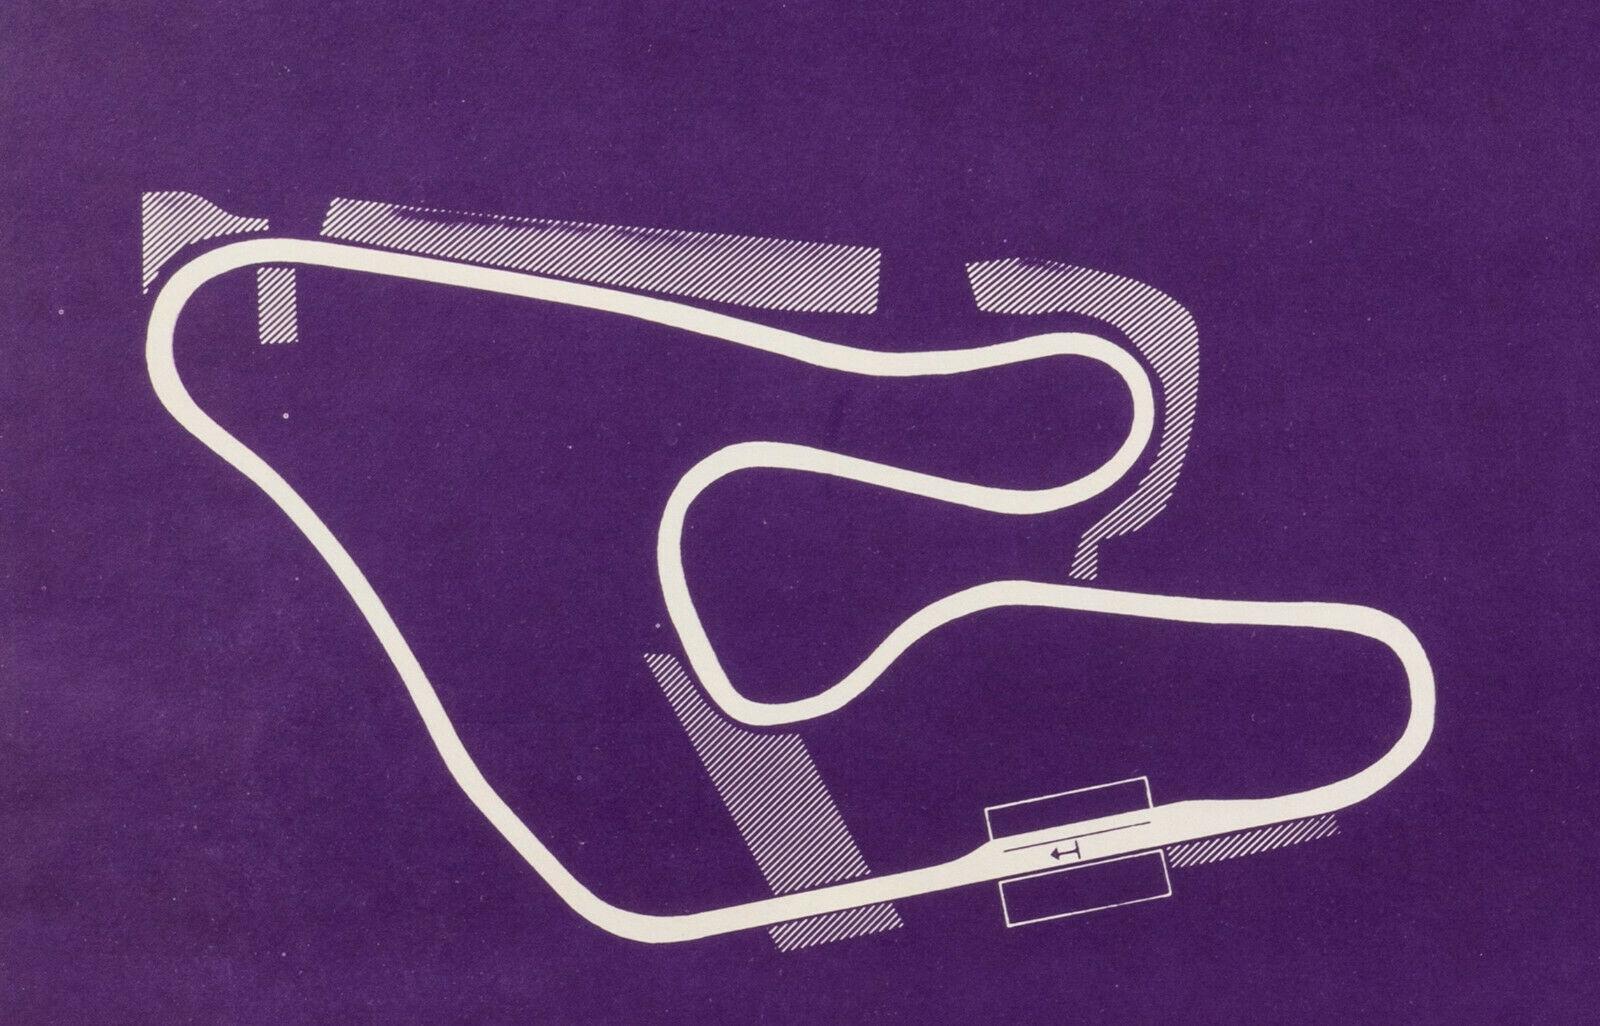 Original Vintage Formula 1 Poster, Österreichring Car Circuit, c.1987

The Spielberg Circuit, previously called Österreichring then A1-Ring and now Red Bull Ring, is a racing circuit located in the municipality of Spielberg in Austria. It is often